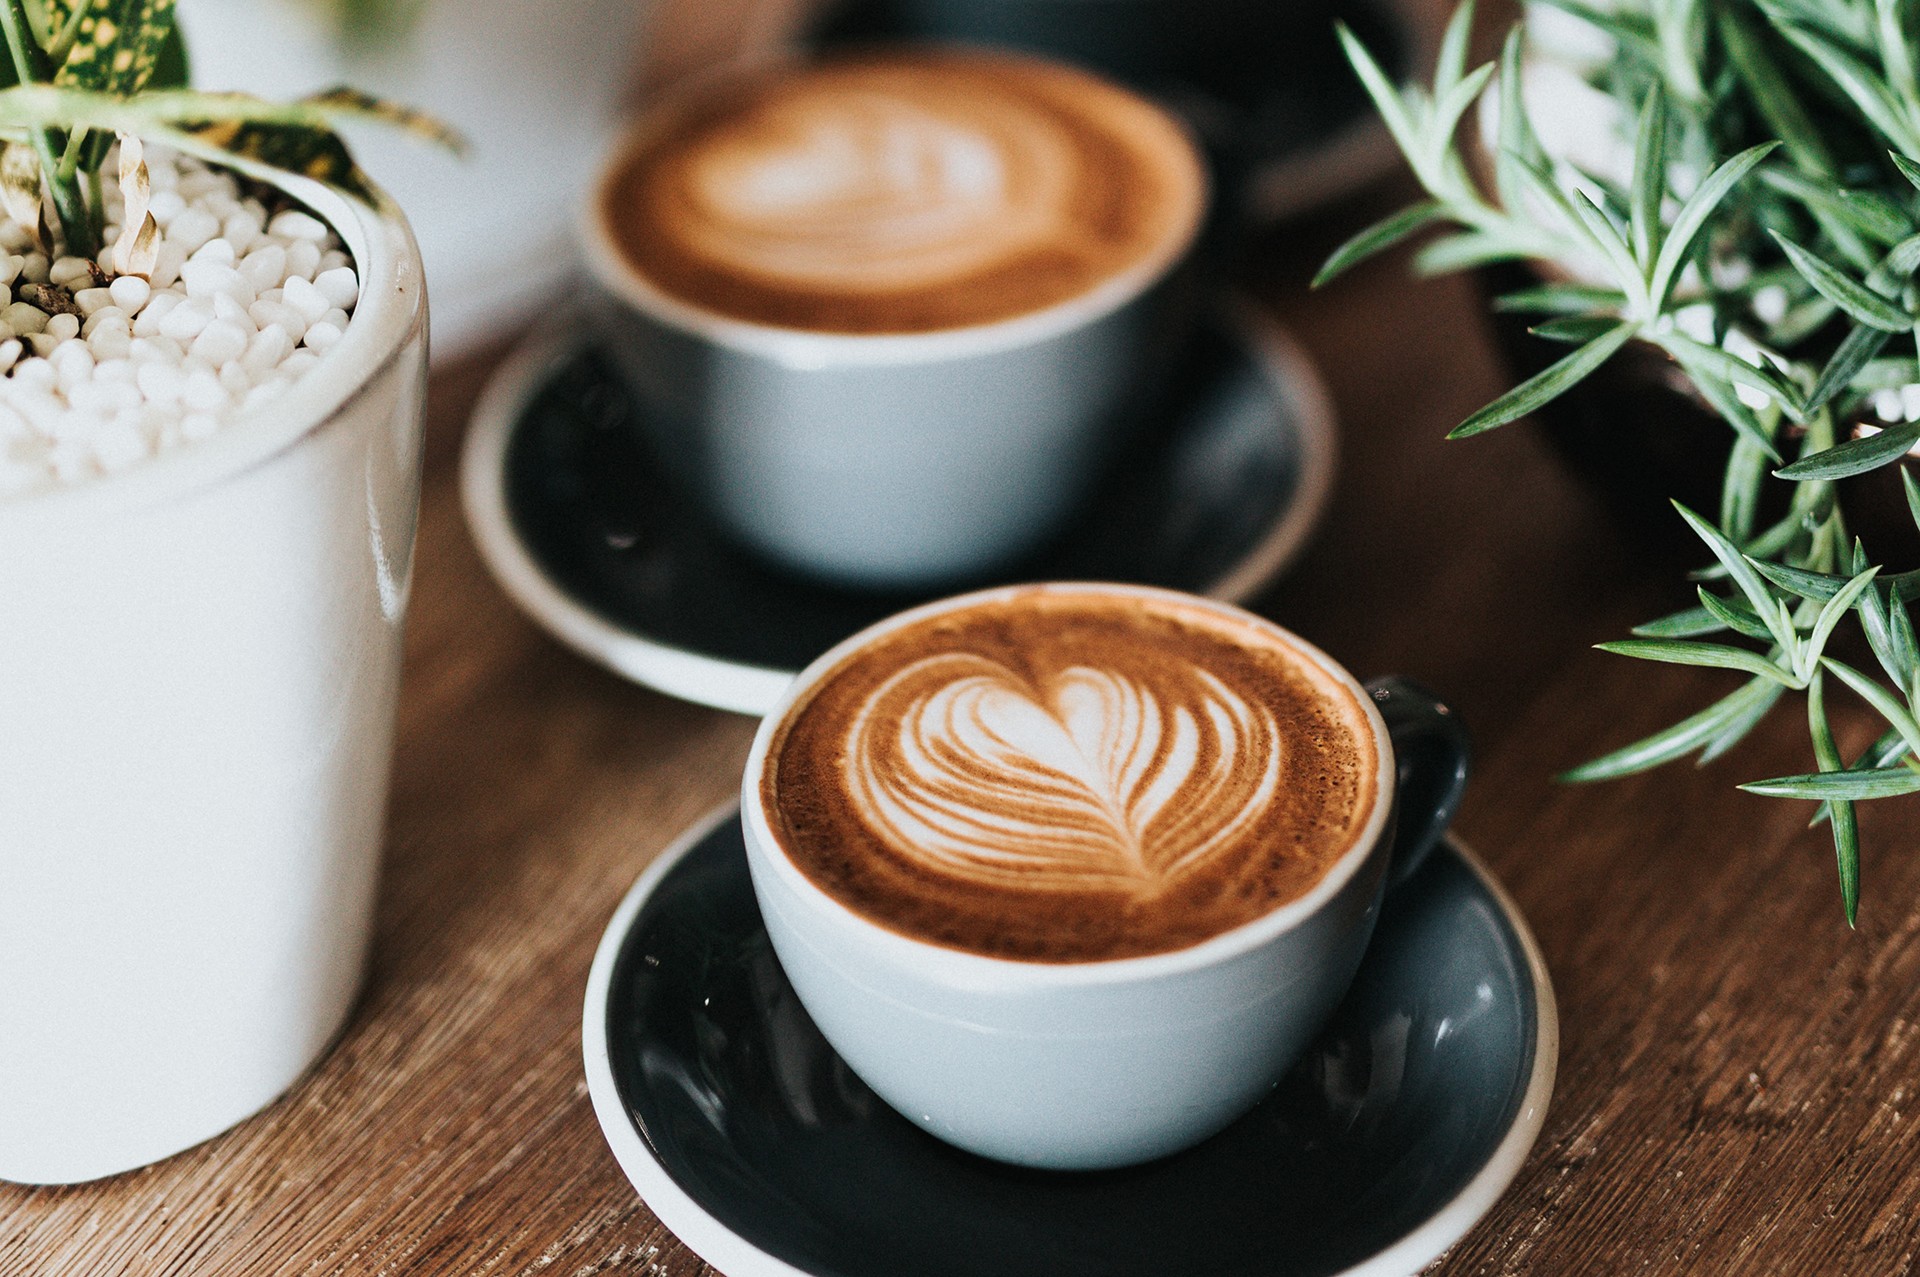 Rave Coffee inviting coffee lovers to its new headquarters in heart of  Cirencester - The Business Magazine